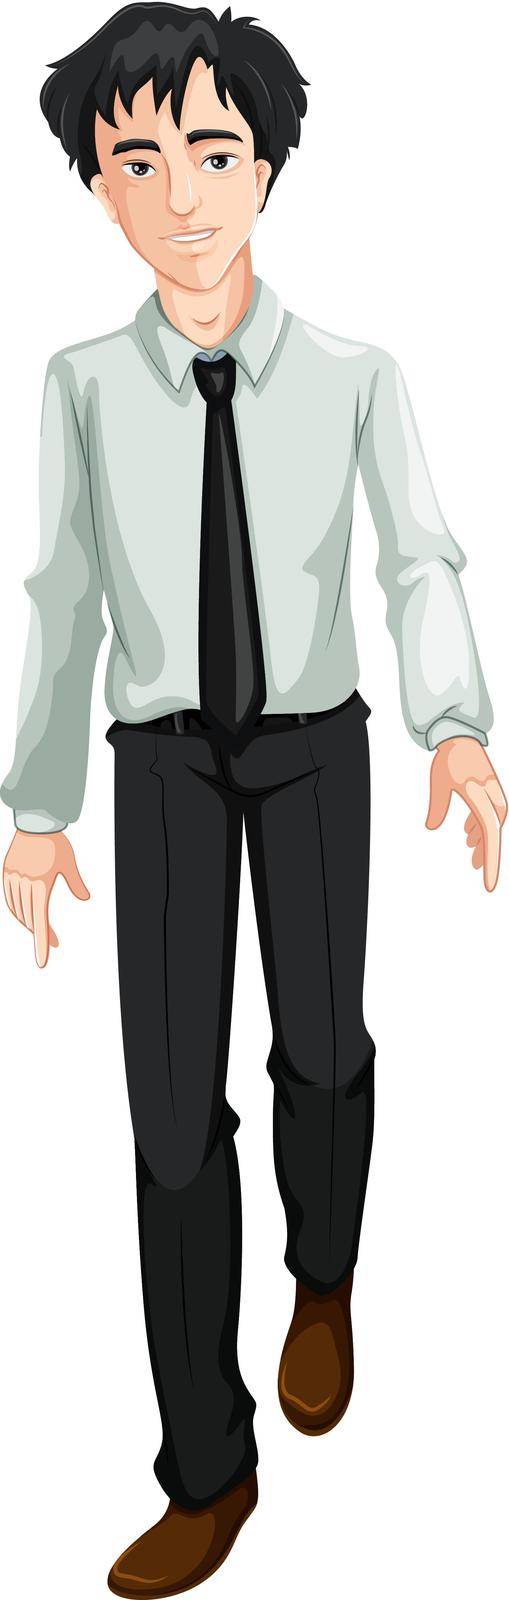 Illustration of an office guy on a white background